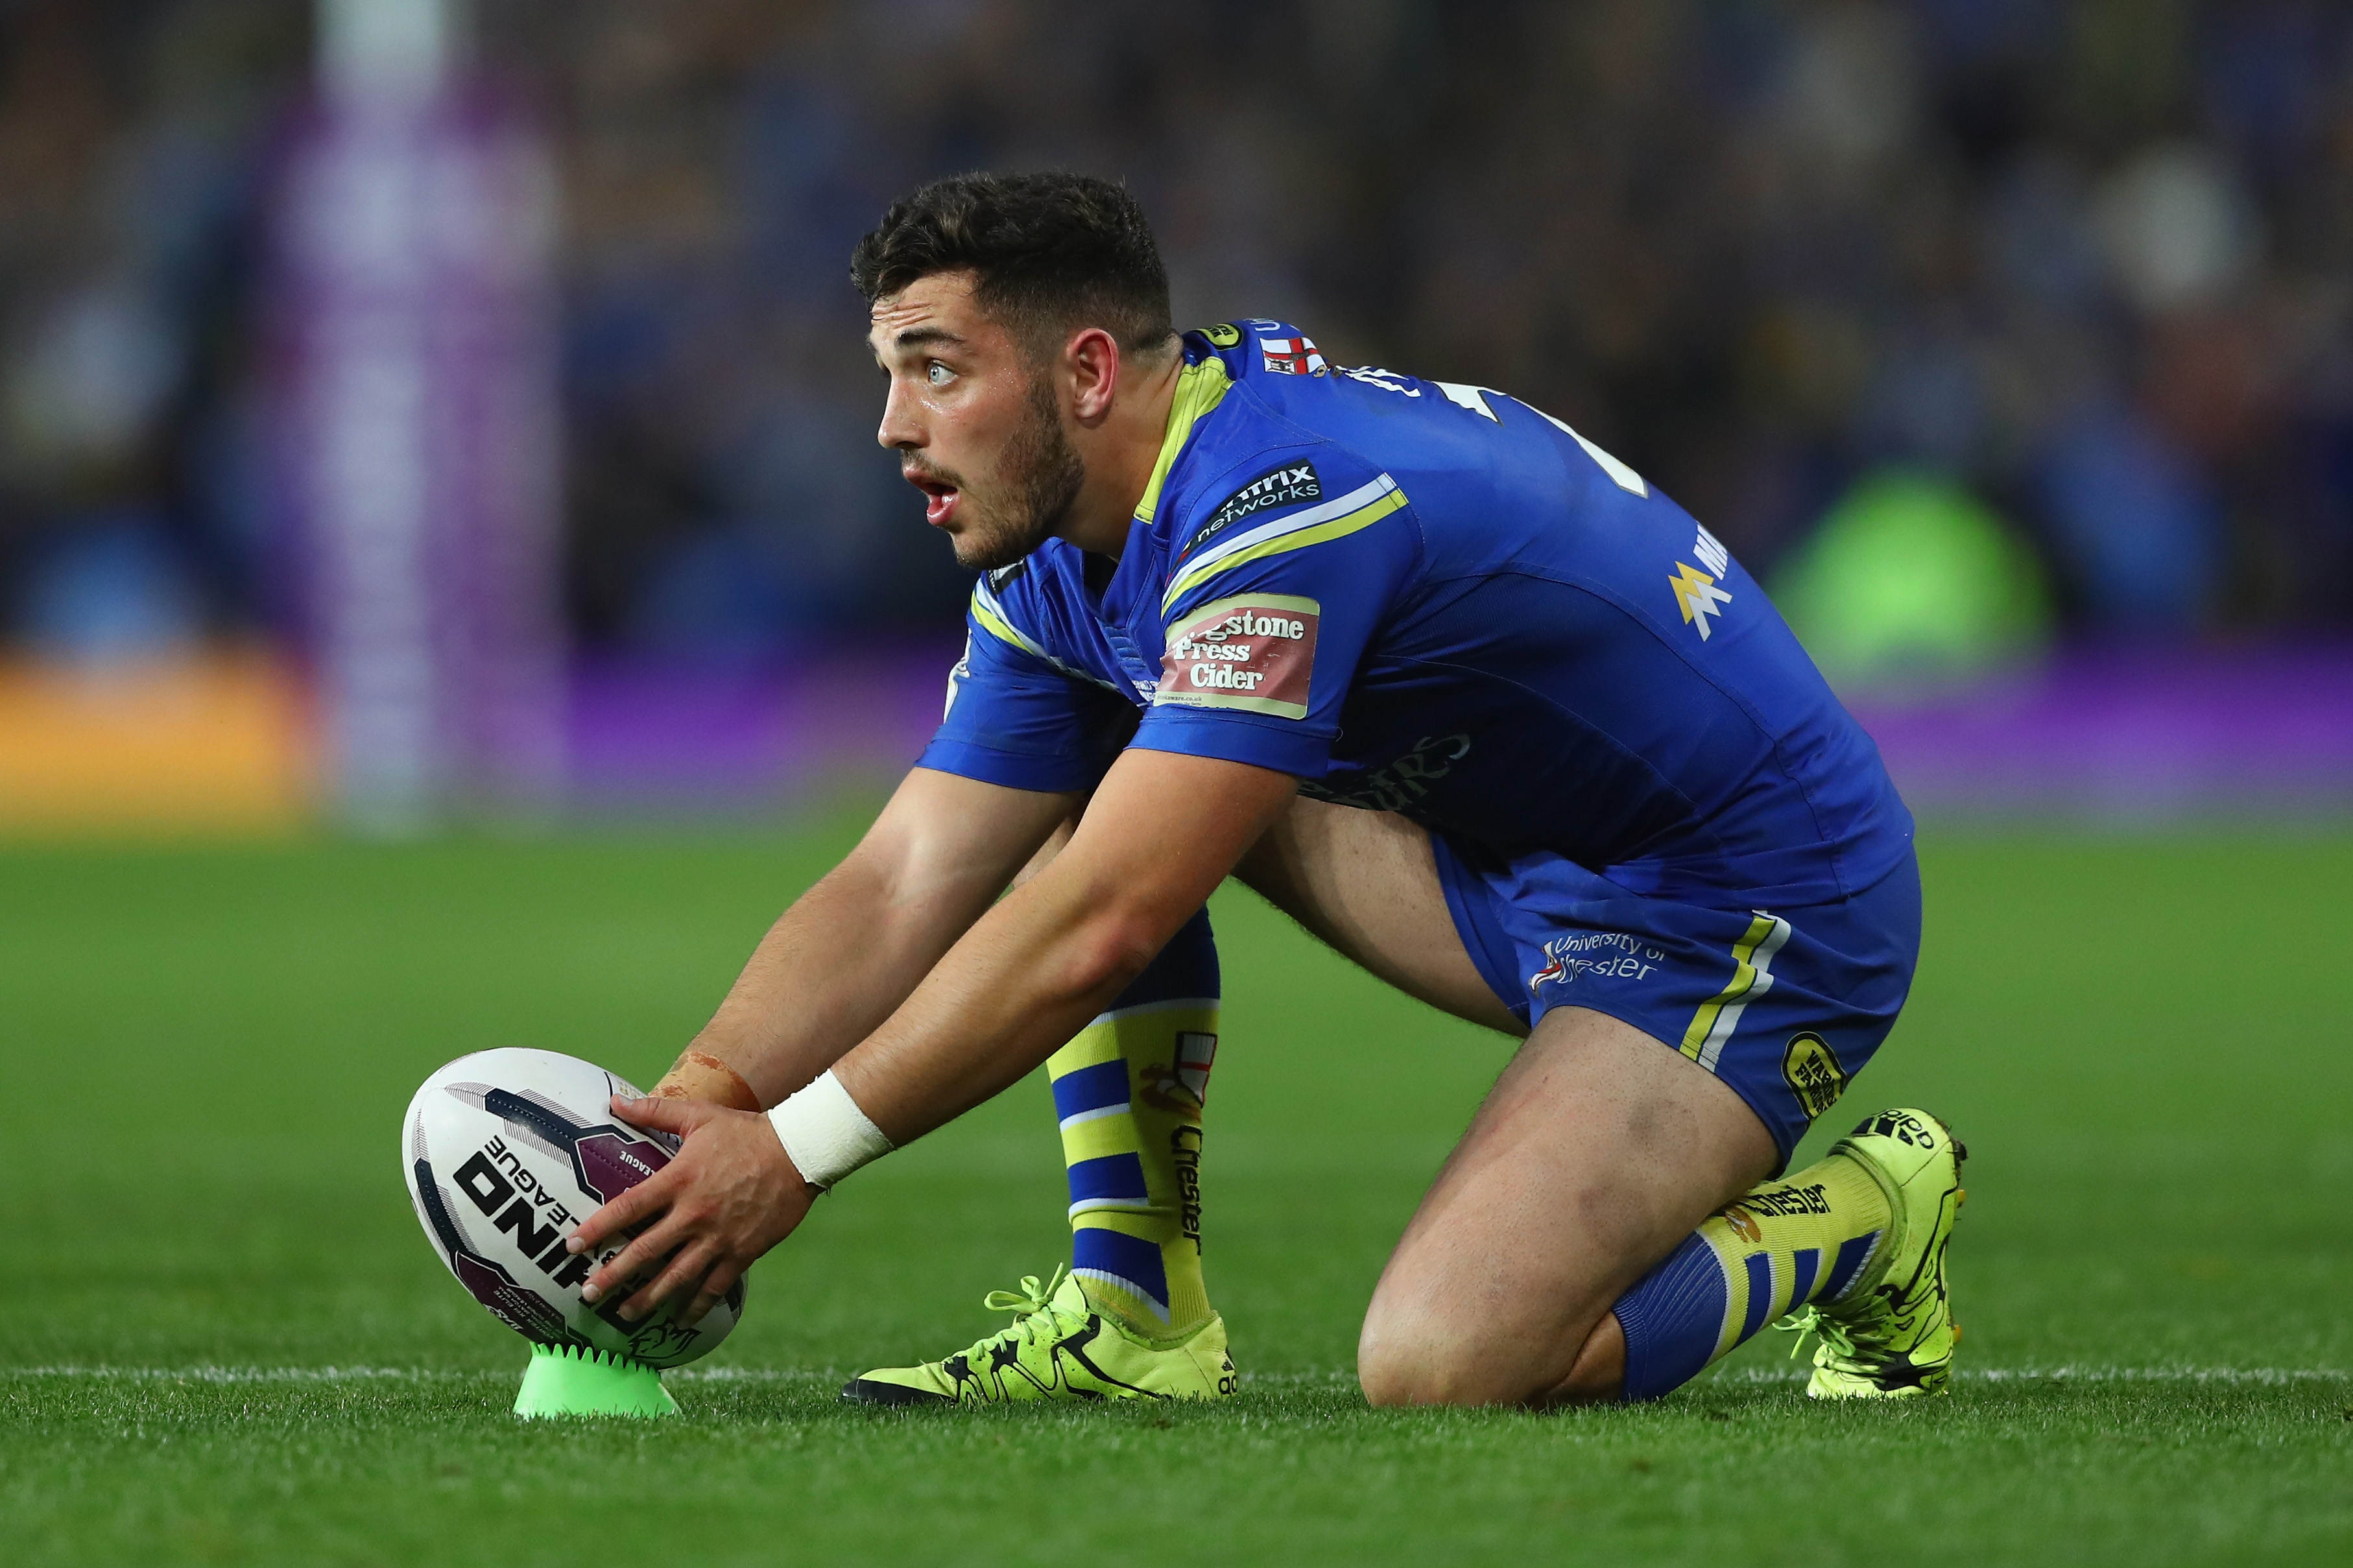 Super League Bank Holiday fixtures, team news, statistics, kick-off times, odds and TV coverage